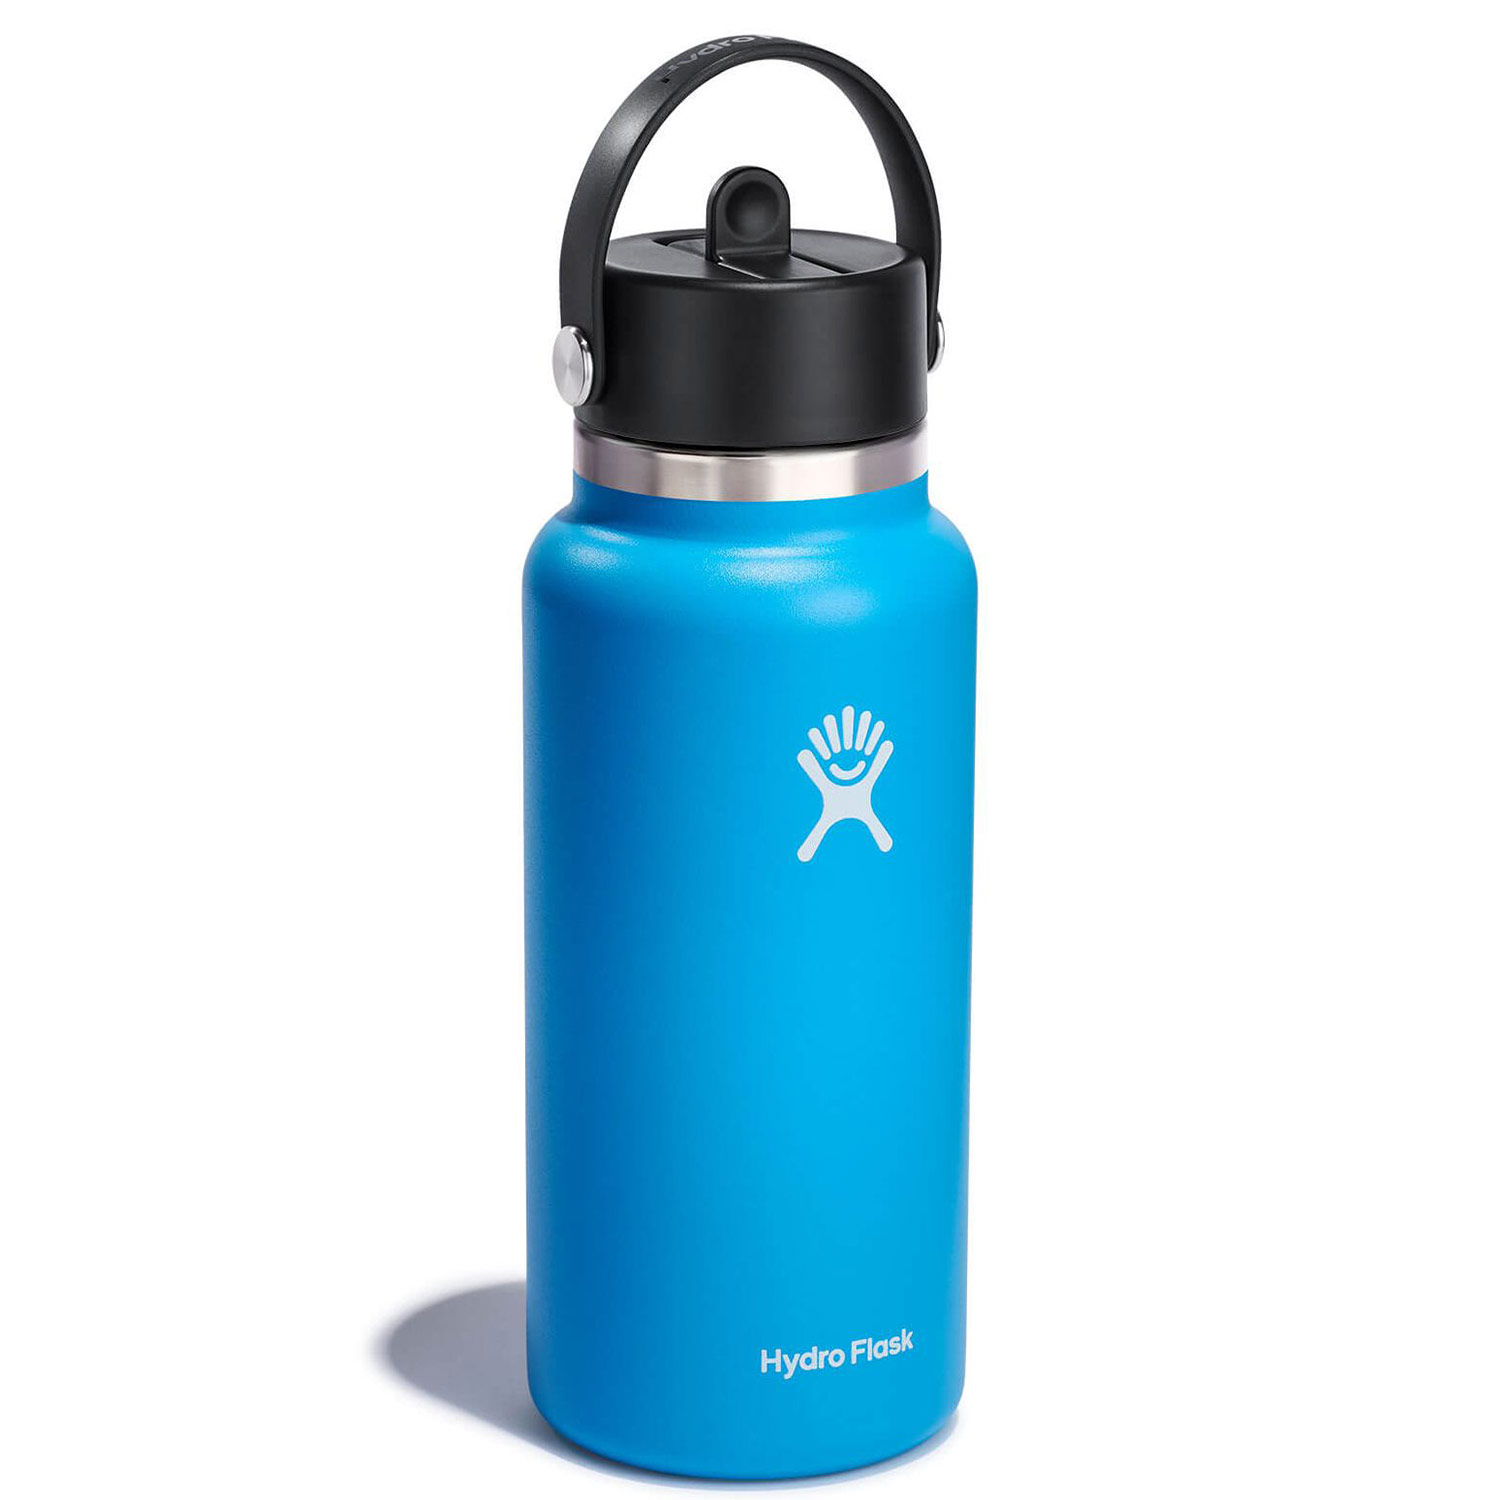 NEW Hydro Flask 32oz. Wide Mouth Water Bottle Vacuum Insulated Pacific Blue